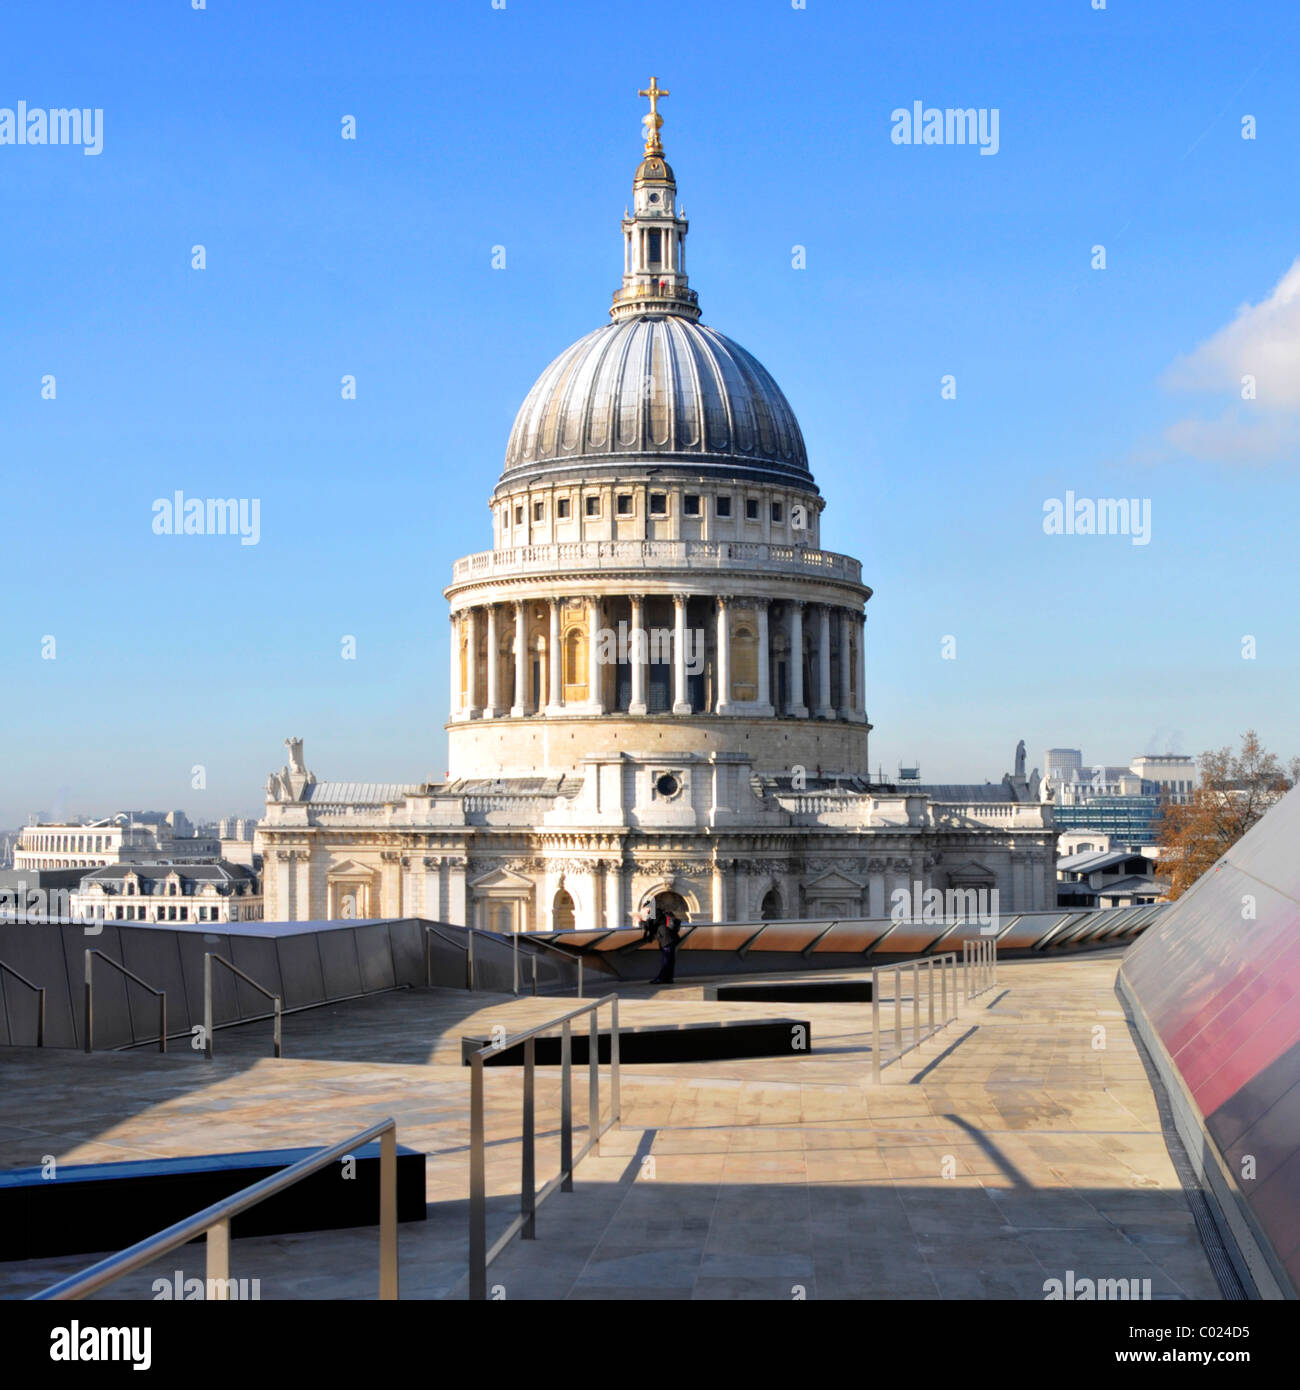 One New Change shopping centre roof terrace & dome of historical iconic St Pauls cathedral European church landmark on blue sky day in City of London Stock Photo